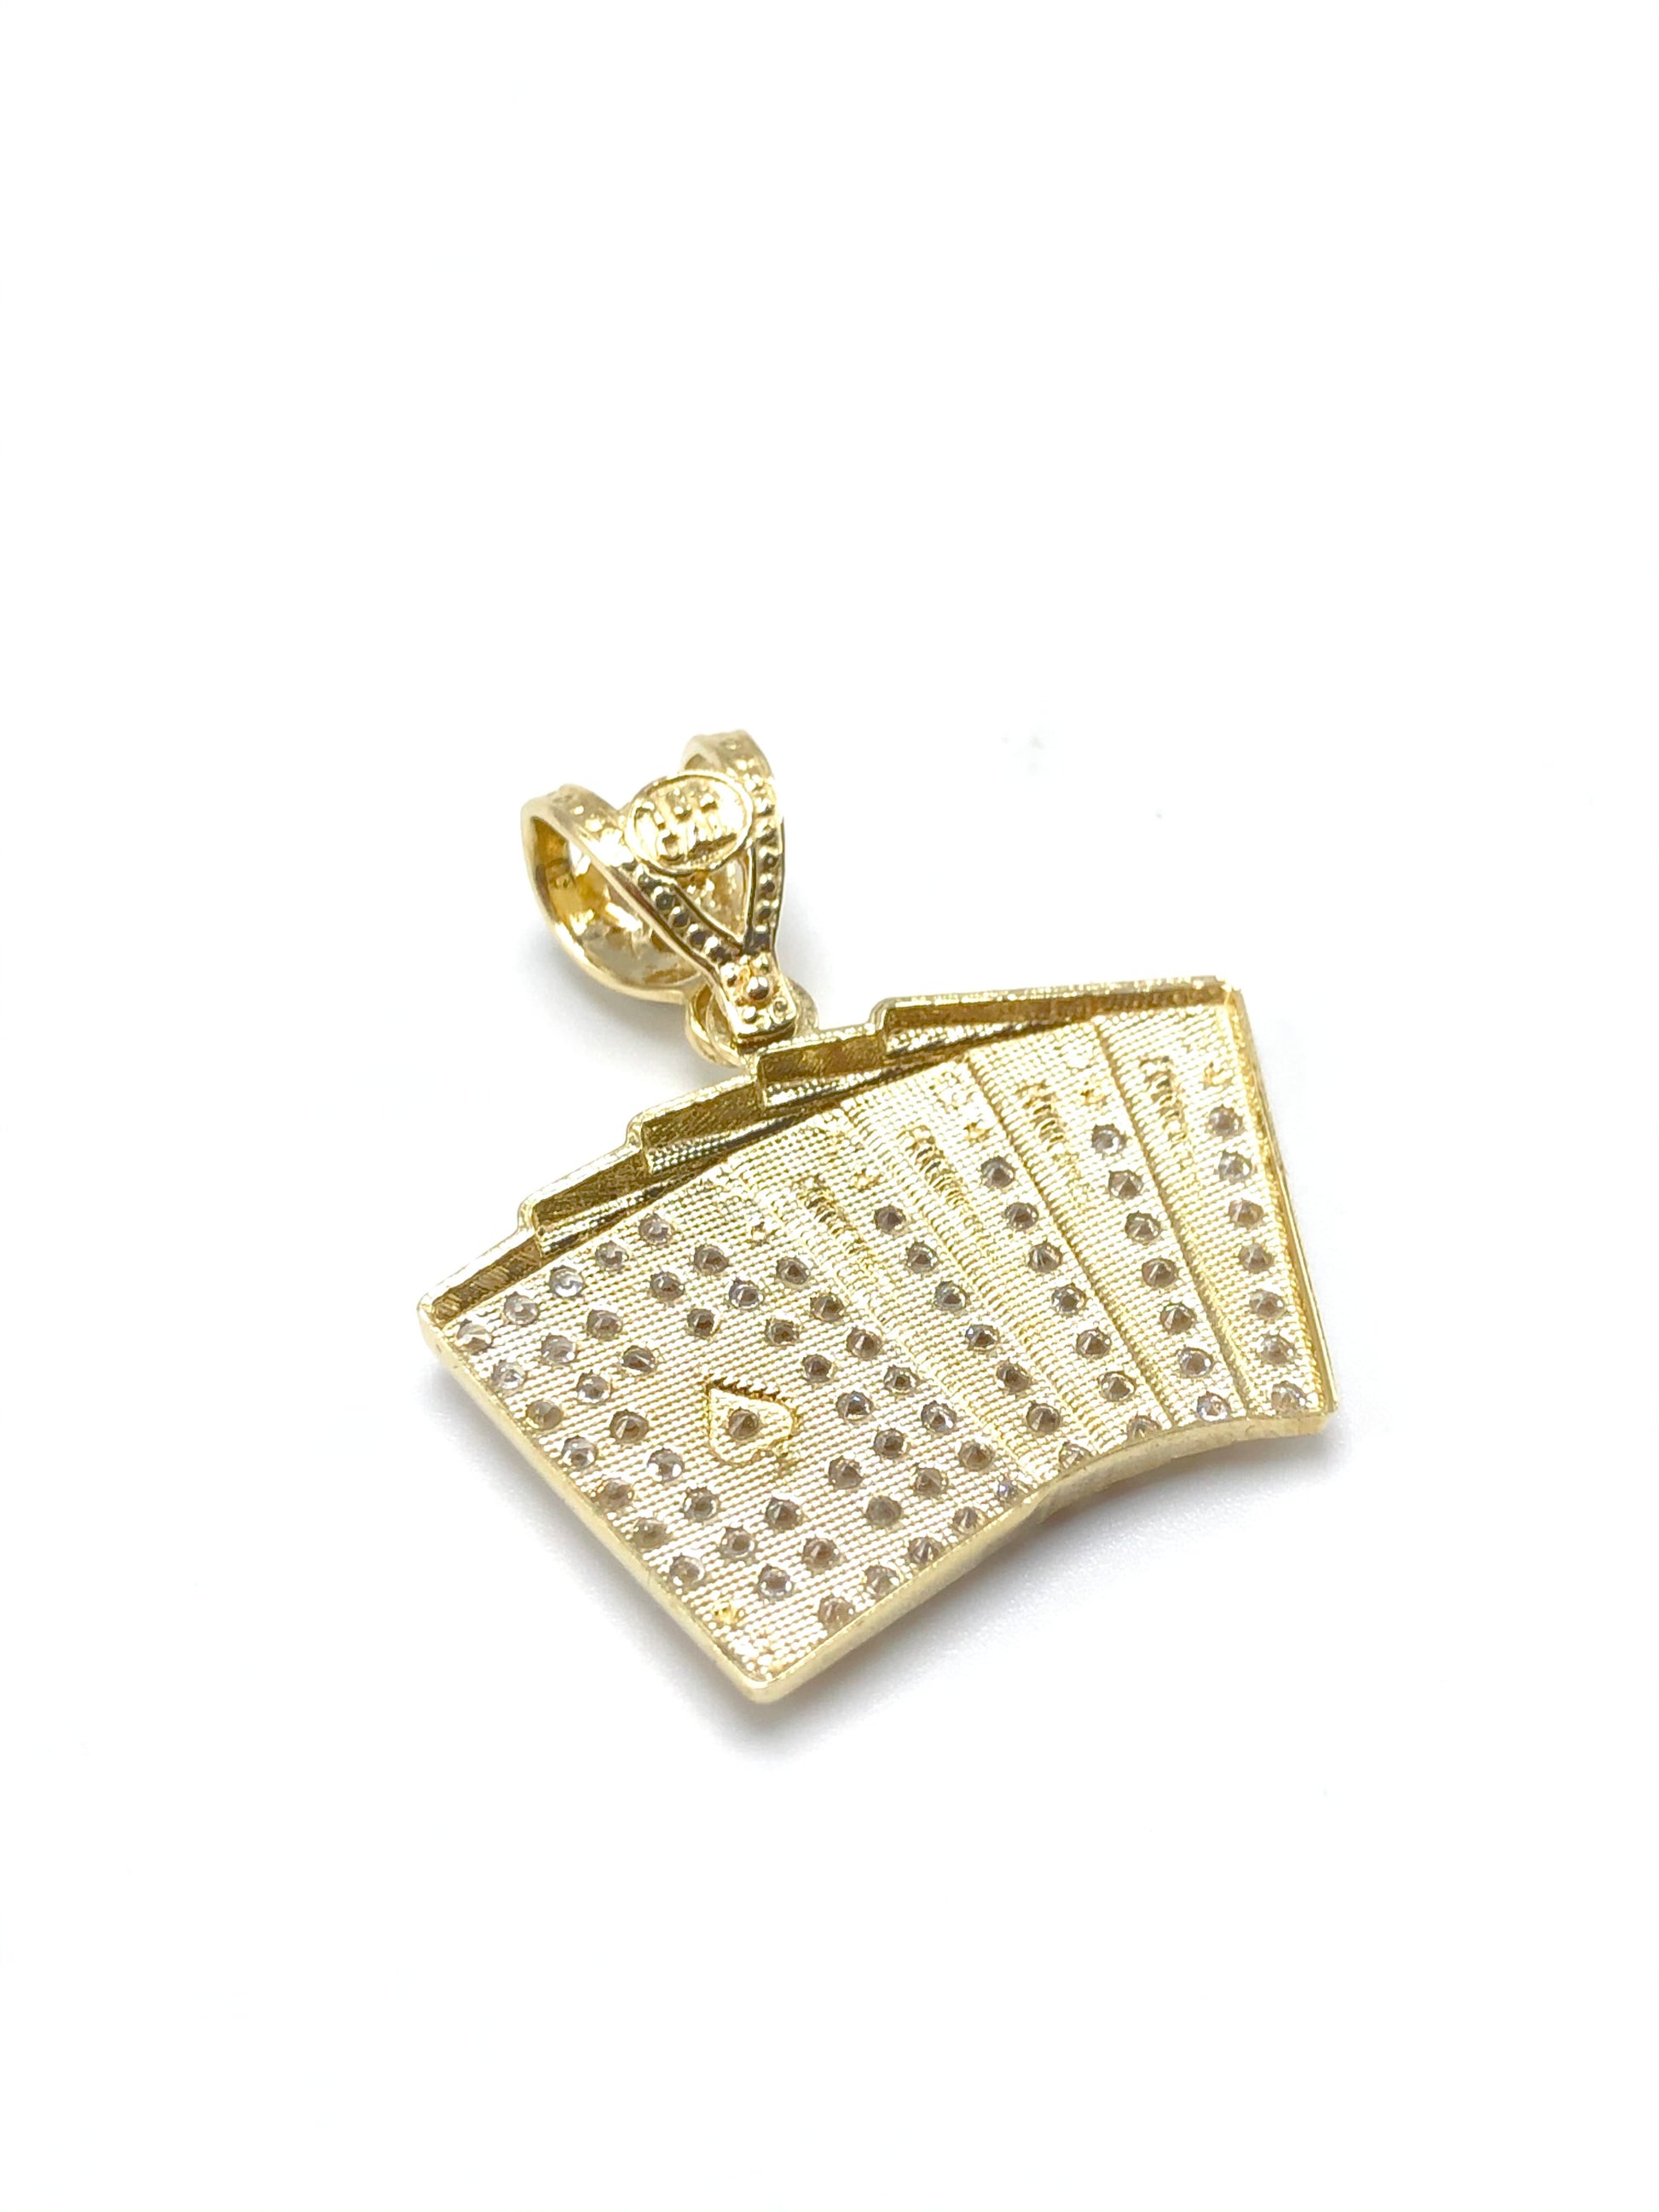 10K Yellow Gold CZ Ace Of Spades Flush Playing Cards Pendant